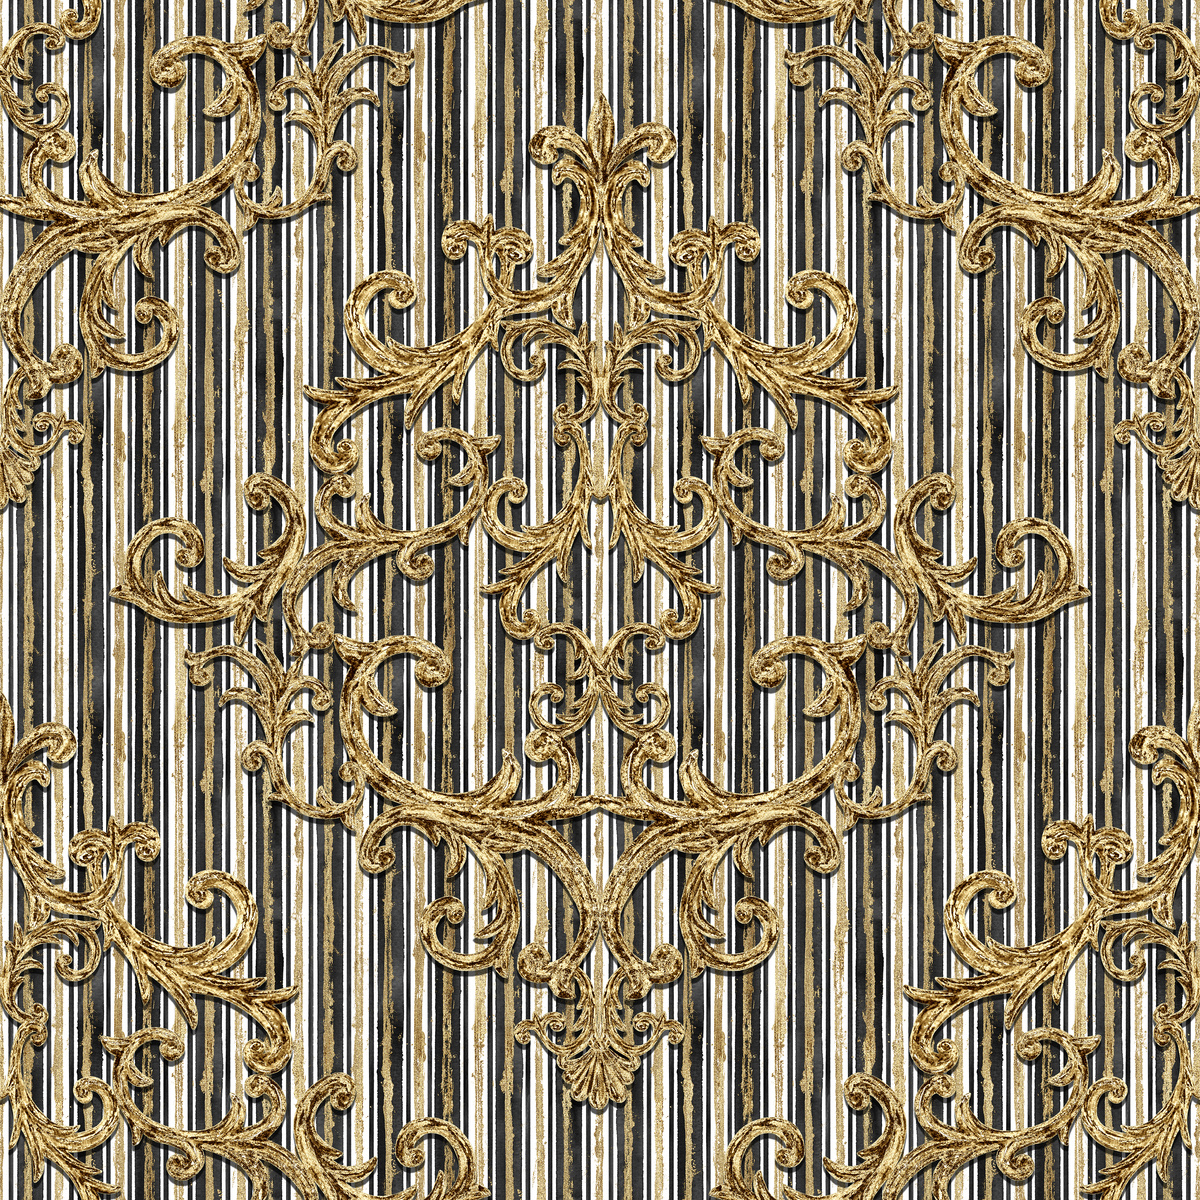 Seamless Baroque Style Damask Pattern. Contemporary and Retro Design Print